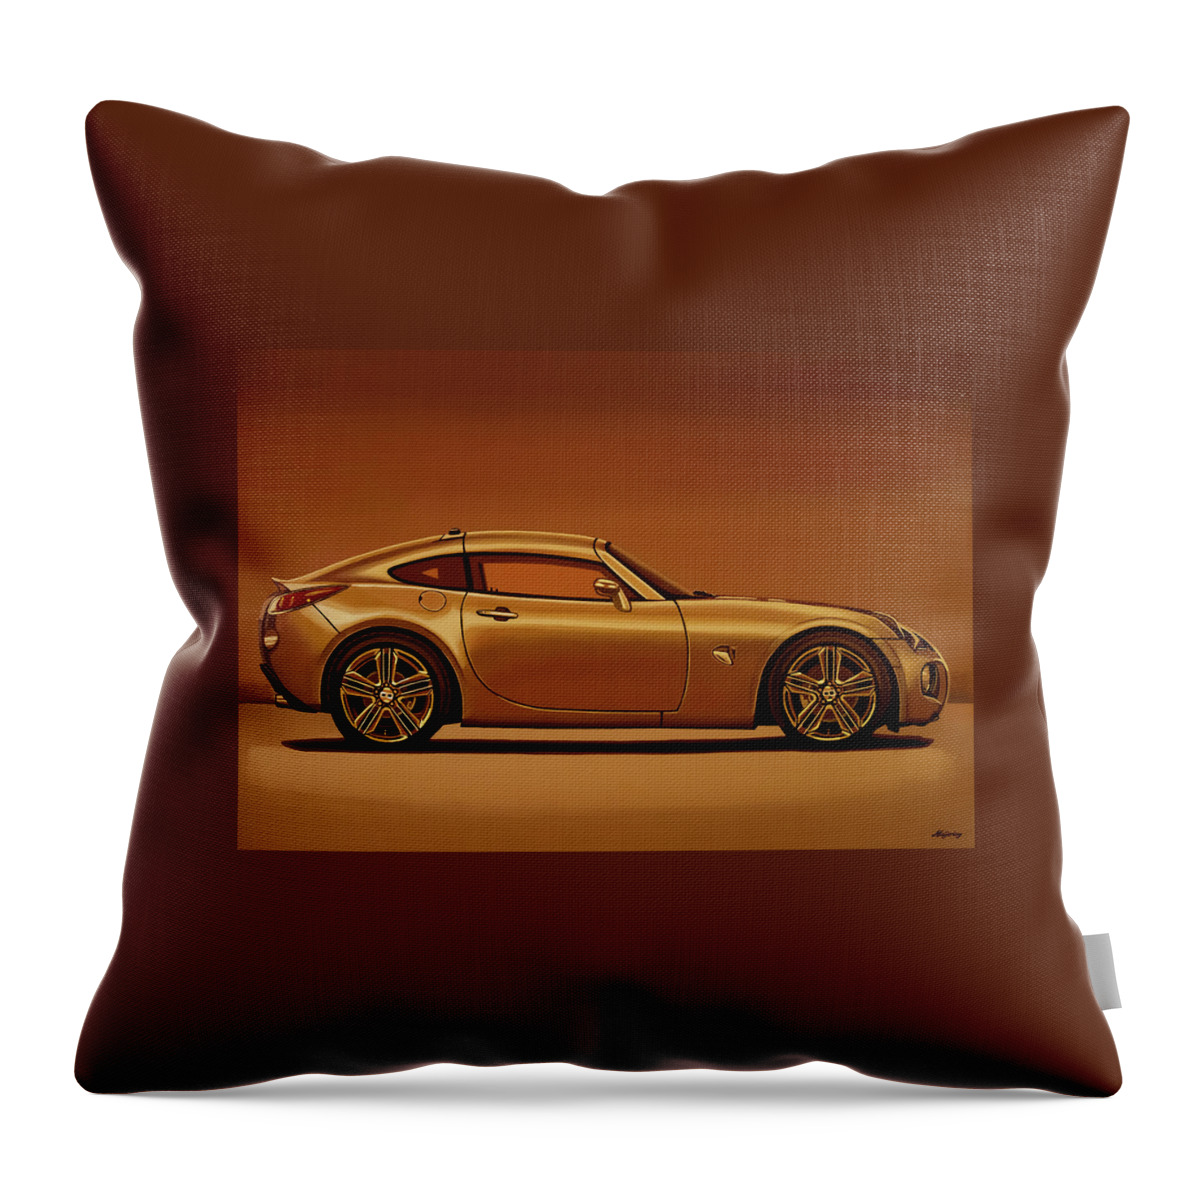 Pontiac Solstice Coupe Throw Pillow featuring the painting Pontiac Solstice Coupe 2009 Painting by Paul Meijering